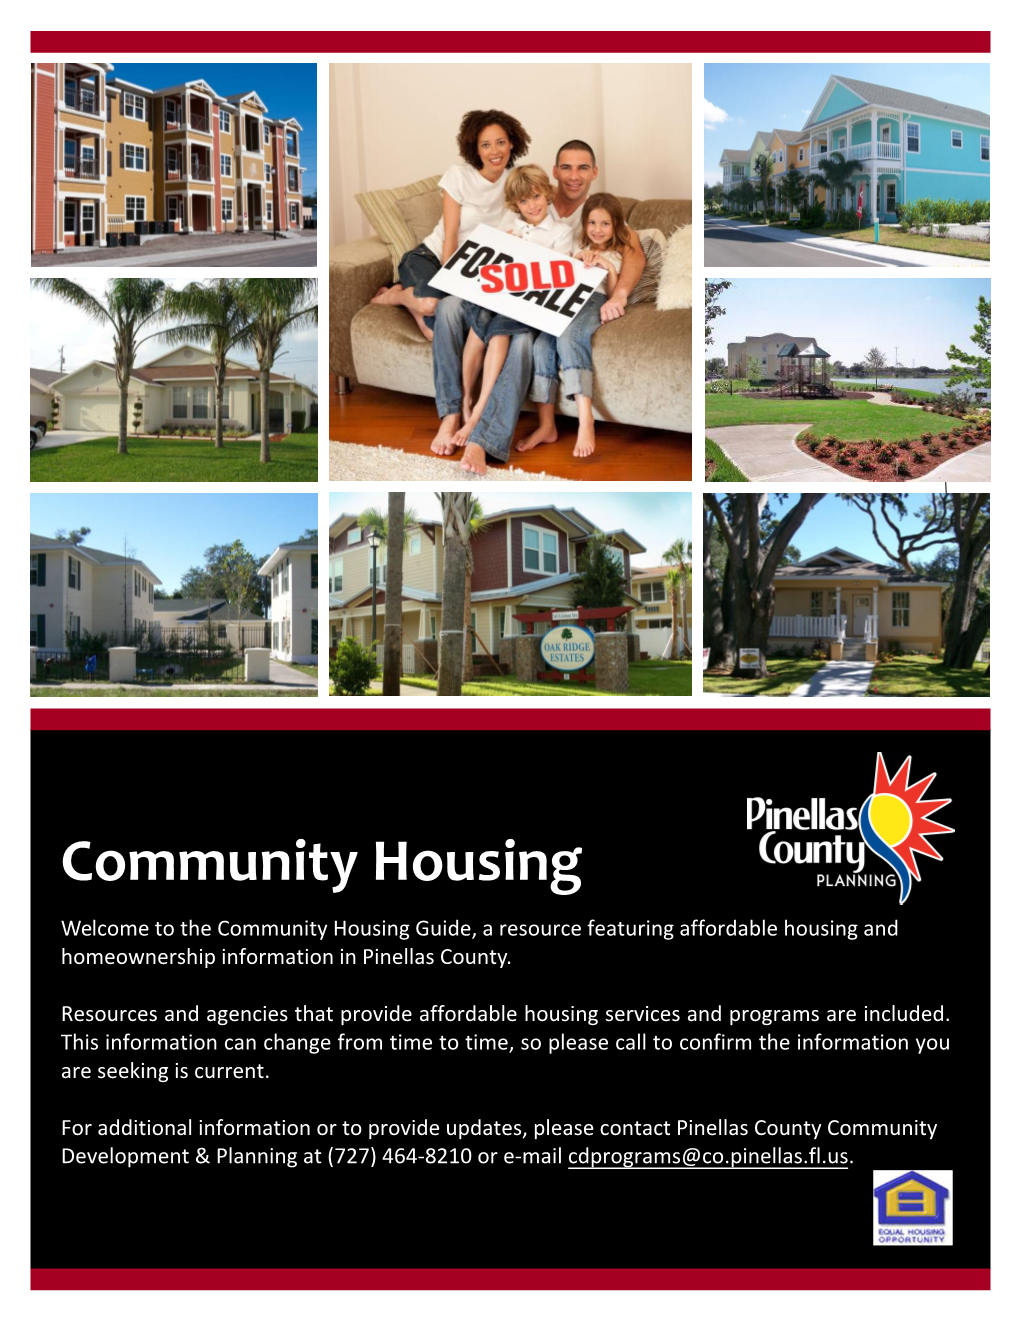 Community Housing Welcome to the Community Housing Guide, a Resource Featuring Affordable Housing and Homeownership Information in Pinellas County